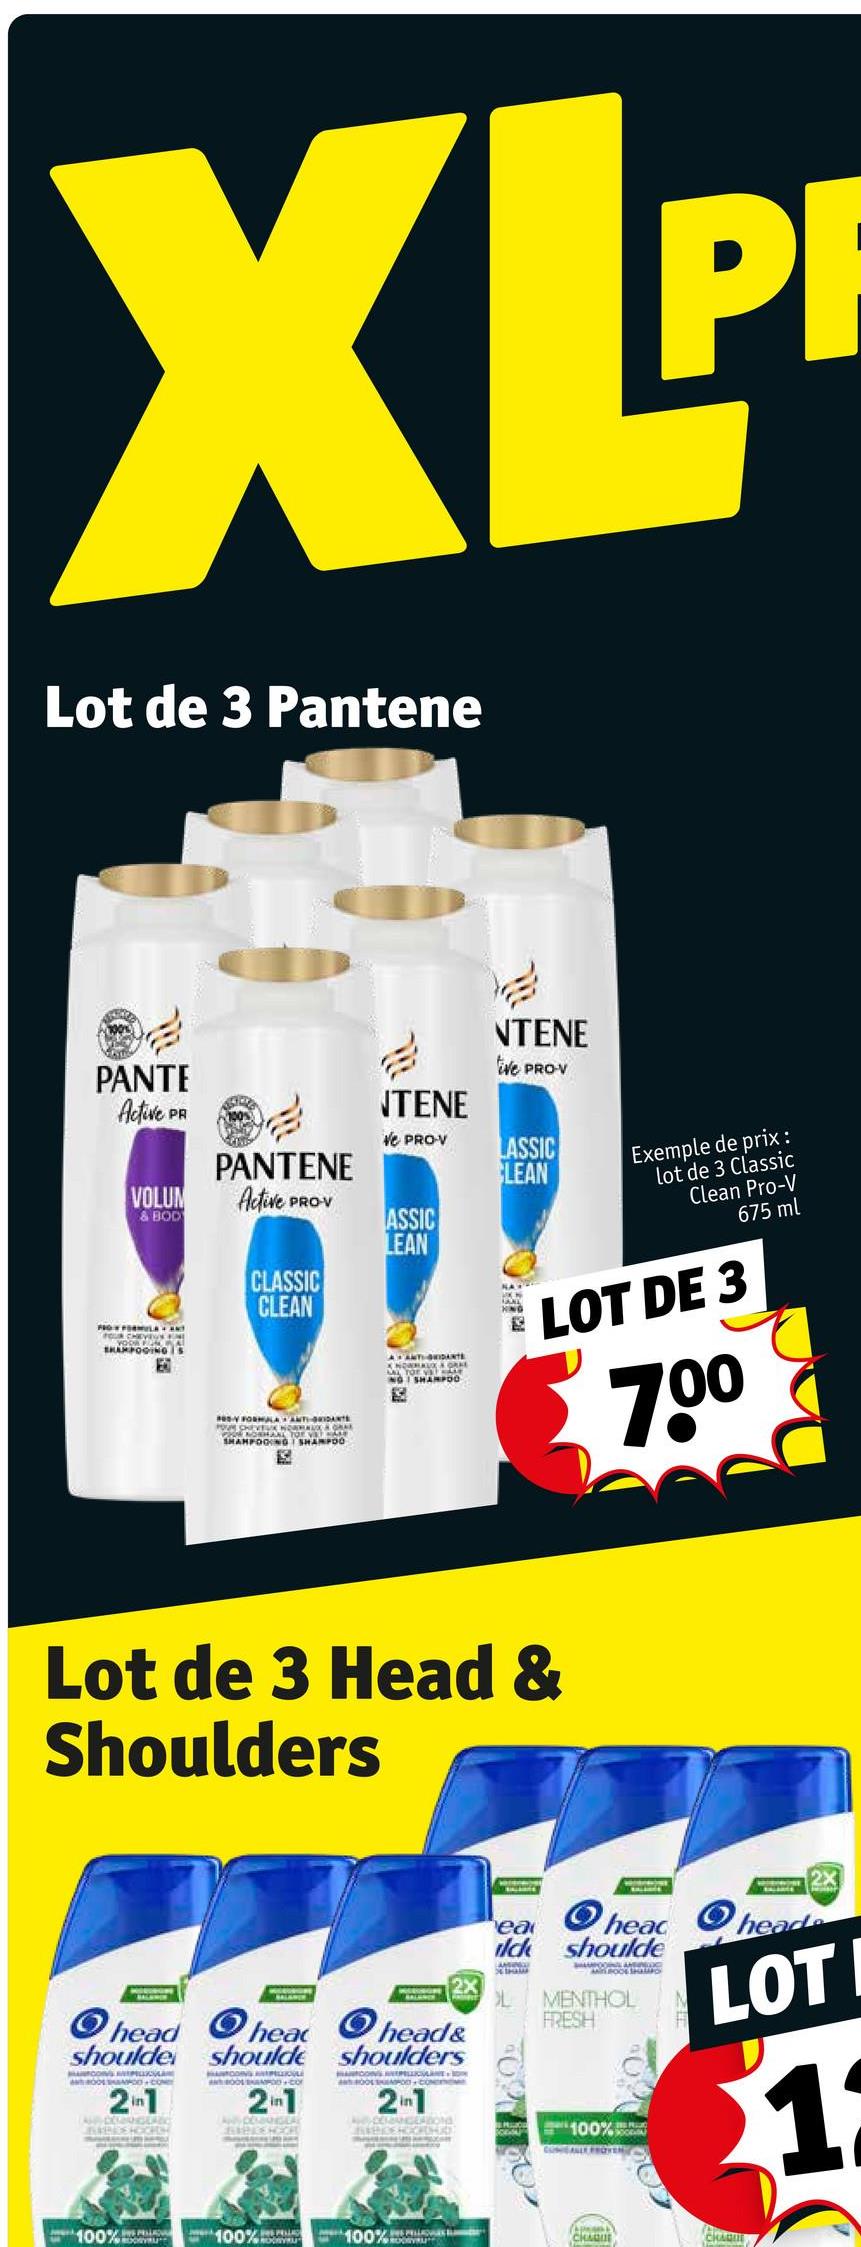 XLP
Lot de 3 Pantene
PANTE
Active PA
VOLUM
& BOD
FRO FORMULA ANT
SHAMPOOING is
EO
PANTENE
Active PROV
CLASSIC
CLEAN
FORMULA ANTI-DANTS
POUR CHEVEUX NORMAL & GRAY
PRENOSHAL FOR VET HAR
SHAMPOOING SHAMPOO
NTENE
NTENE
tive PRO-V
Ve PRO-V
LASSIC
CLEAN
ASSIC
LEAN
AANTI-BRIDANTS
KNOWNAUX ORKE
NG SHARPOD
Exemple de prix :
lot de 3 Classic
Clean Pro-V
675 ml
LOT DE 3
70⁰
Lot de 3 Head &
Shoulders
Ohead head
head&
shoulde should shoulders
MACOS PELICAN
ANTROPOD COM
MANTOOING
BOOL POD-CO
AOOL SPOD CON
2in1
AGAC
21
2in1
100%
100%RLING
100%"
2X
ea
Ohead head.
ilck shoulde
POON AHENGDIC
MOO SHO
MENTHOL
FRESH
100%
CONALLY PROVEN
LOTI
11
(A)
CHAQUE
CHAQUE